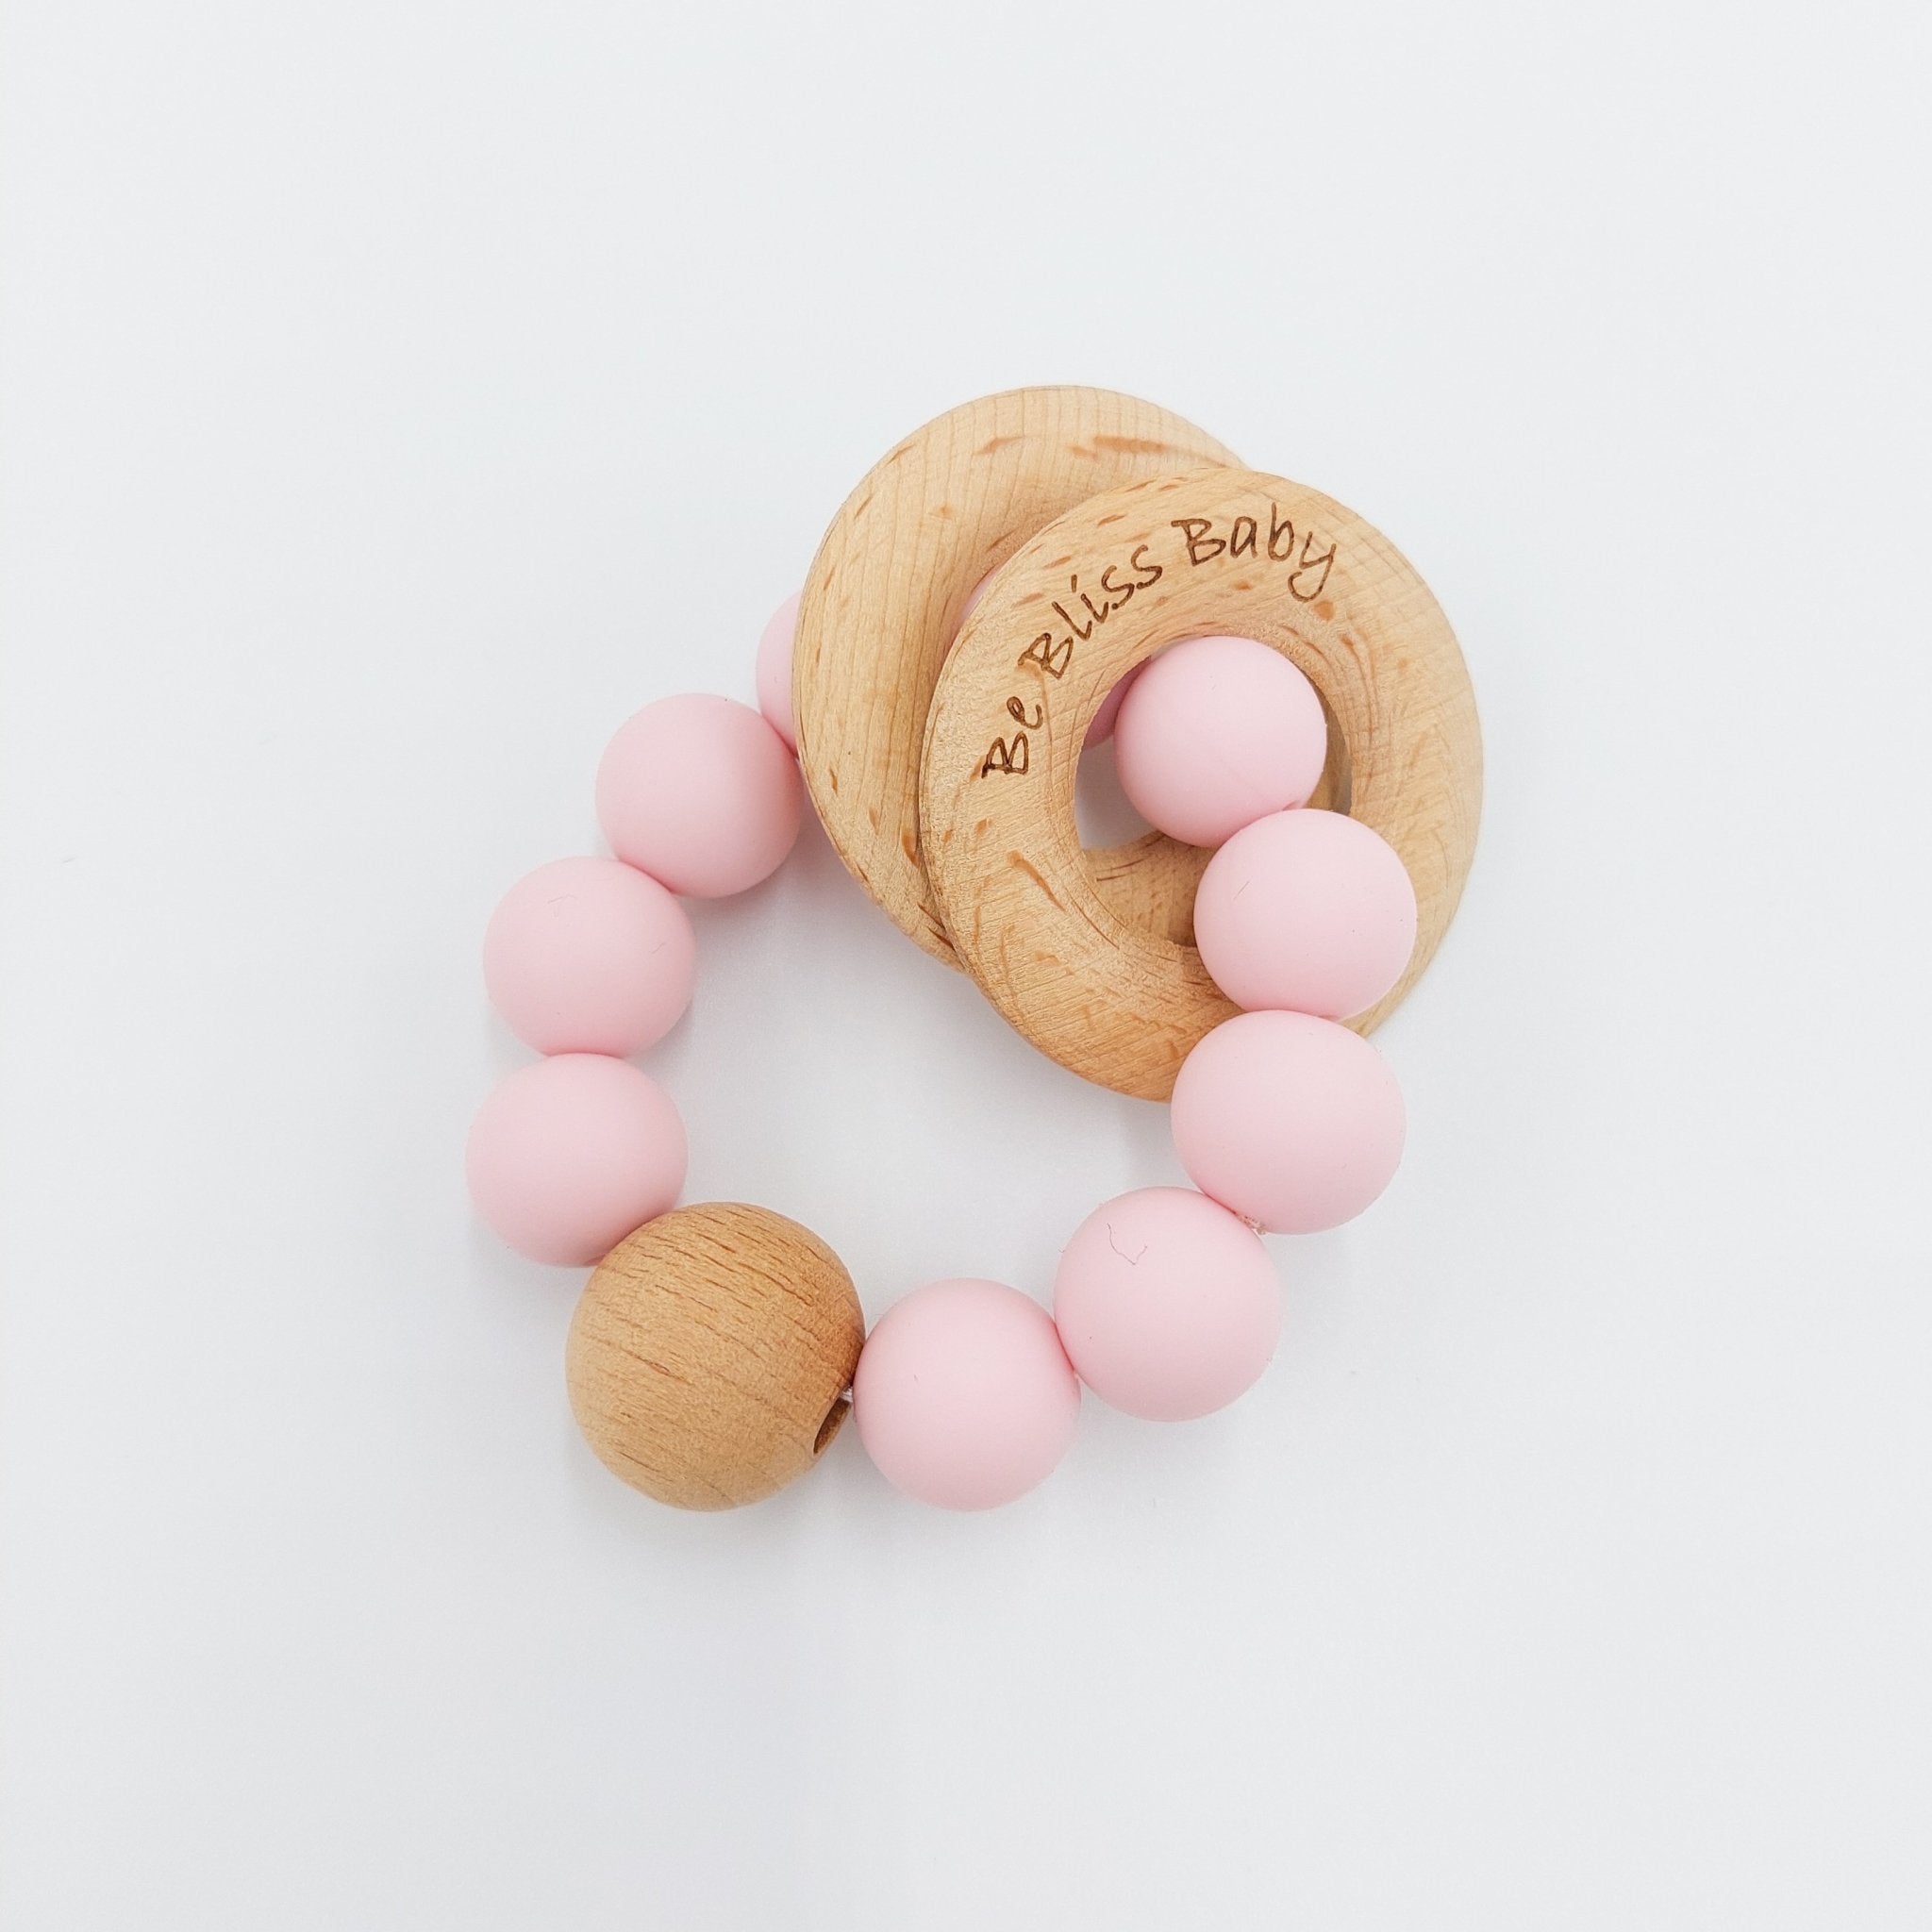 Silicone Teether Ring - Pink - Be Bliss Baby